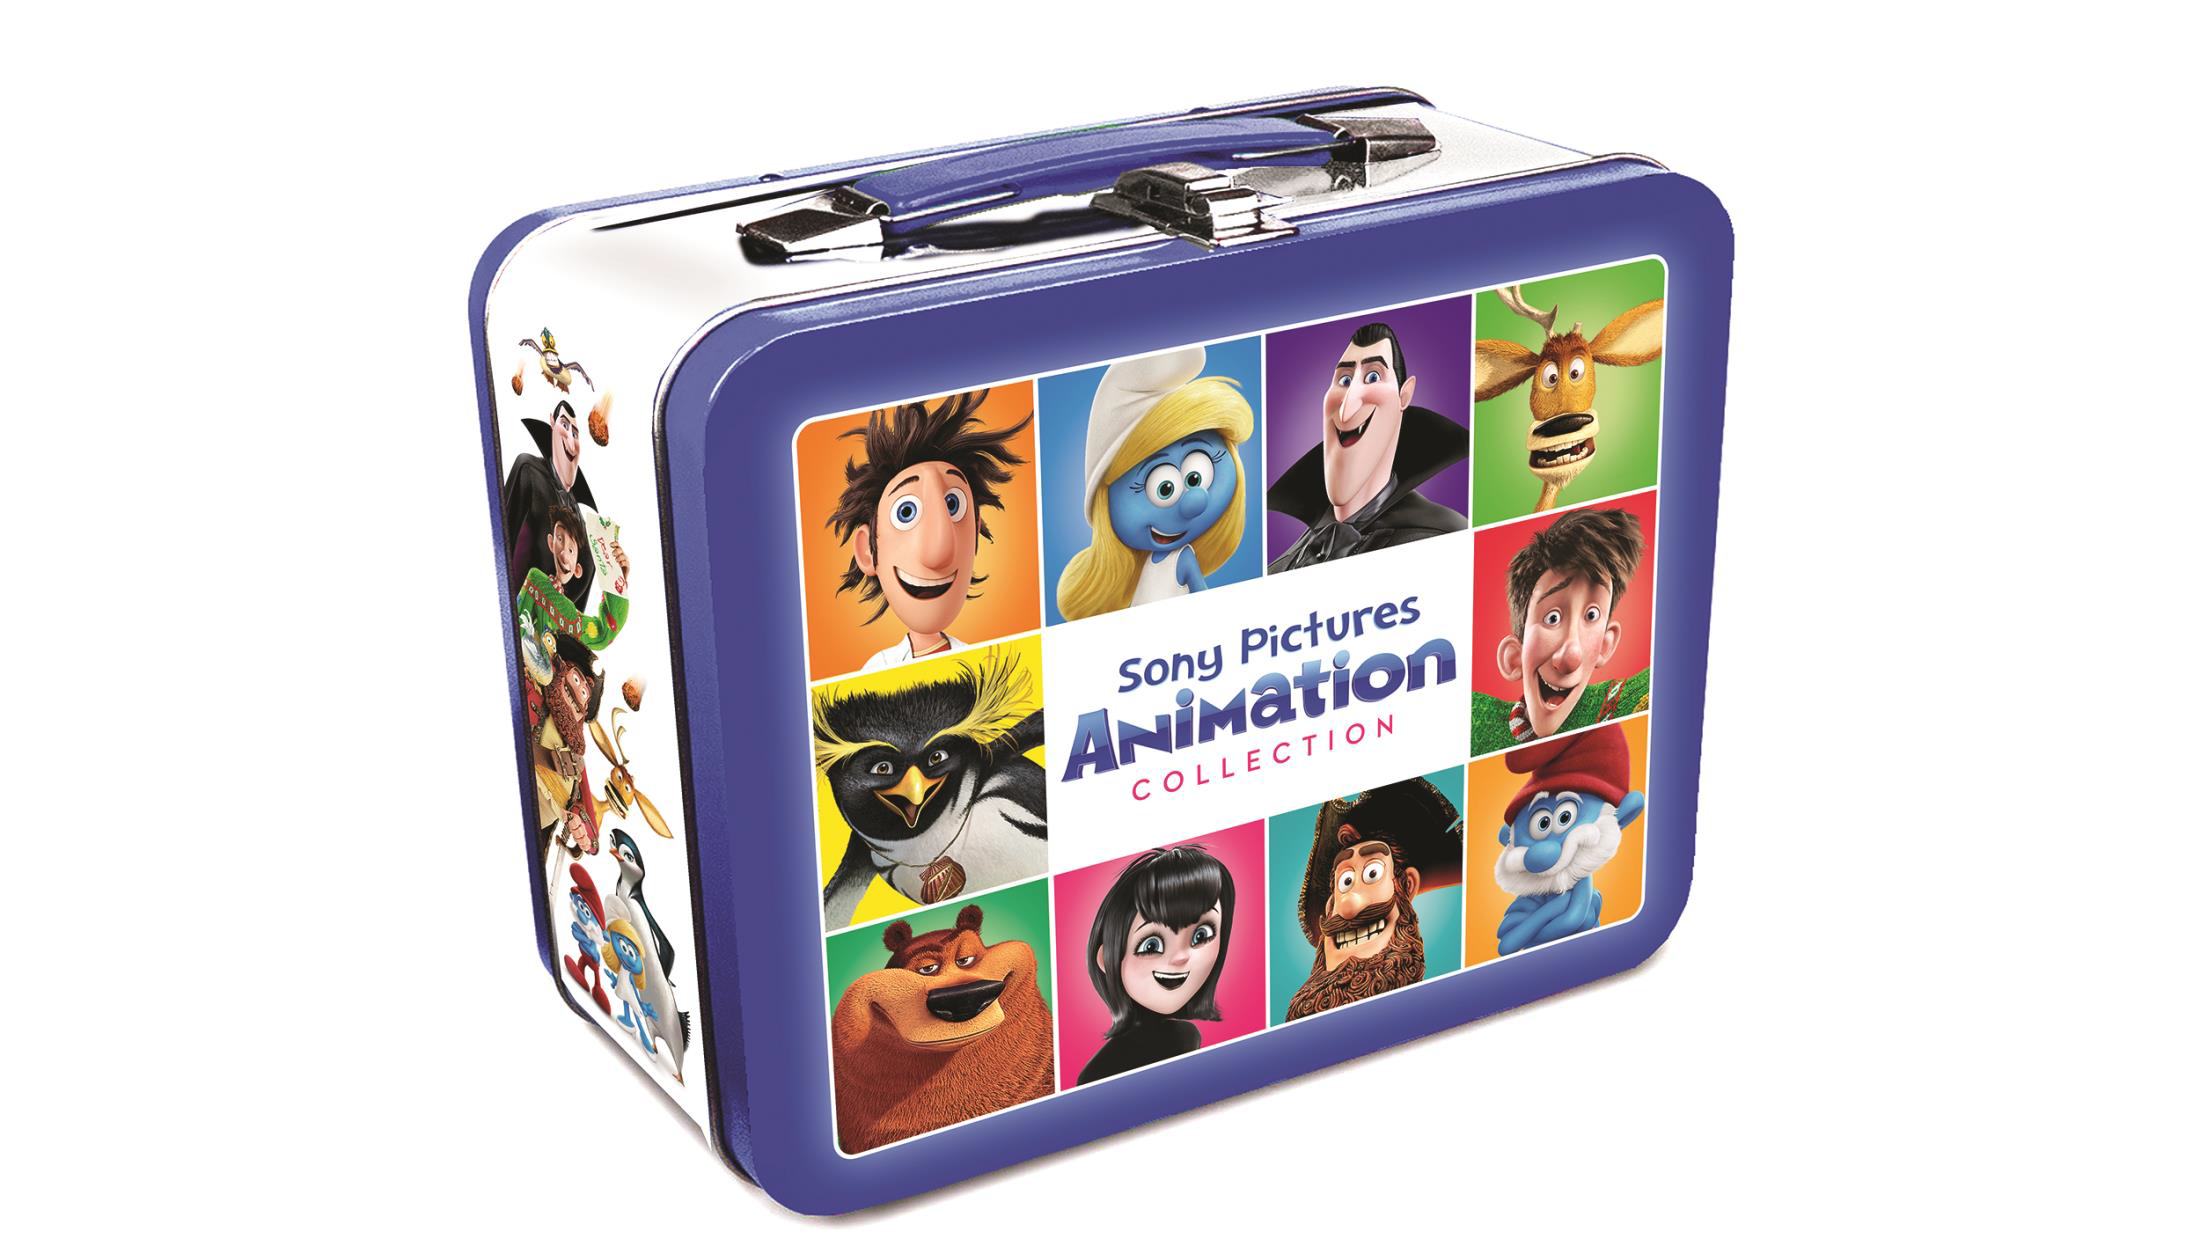 Colectie filme animate Sony Lunchbox / Lunchbox Gift Set Sony Picture Animation Collection | Genndy Tartakovsky, Raja Gosnell, Ash Brannon, Chris Buck, Sarah Smith, Barry Cook